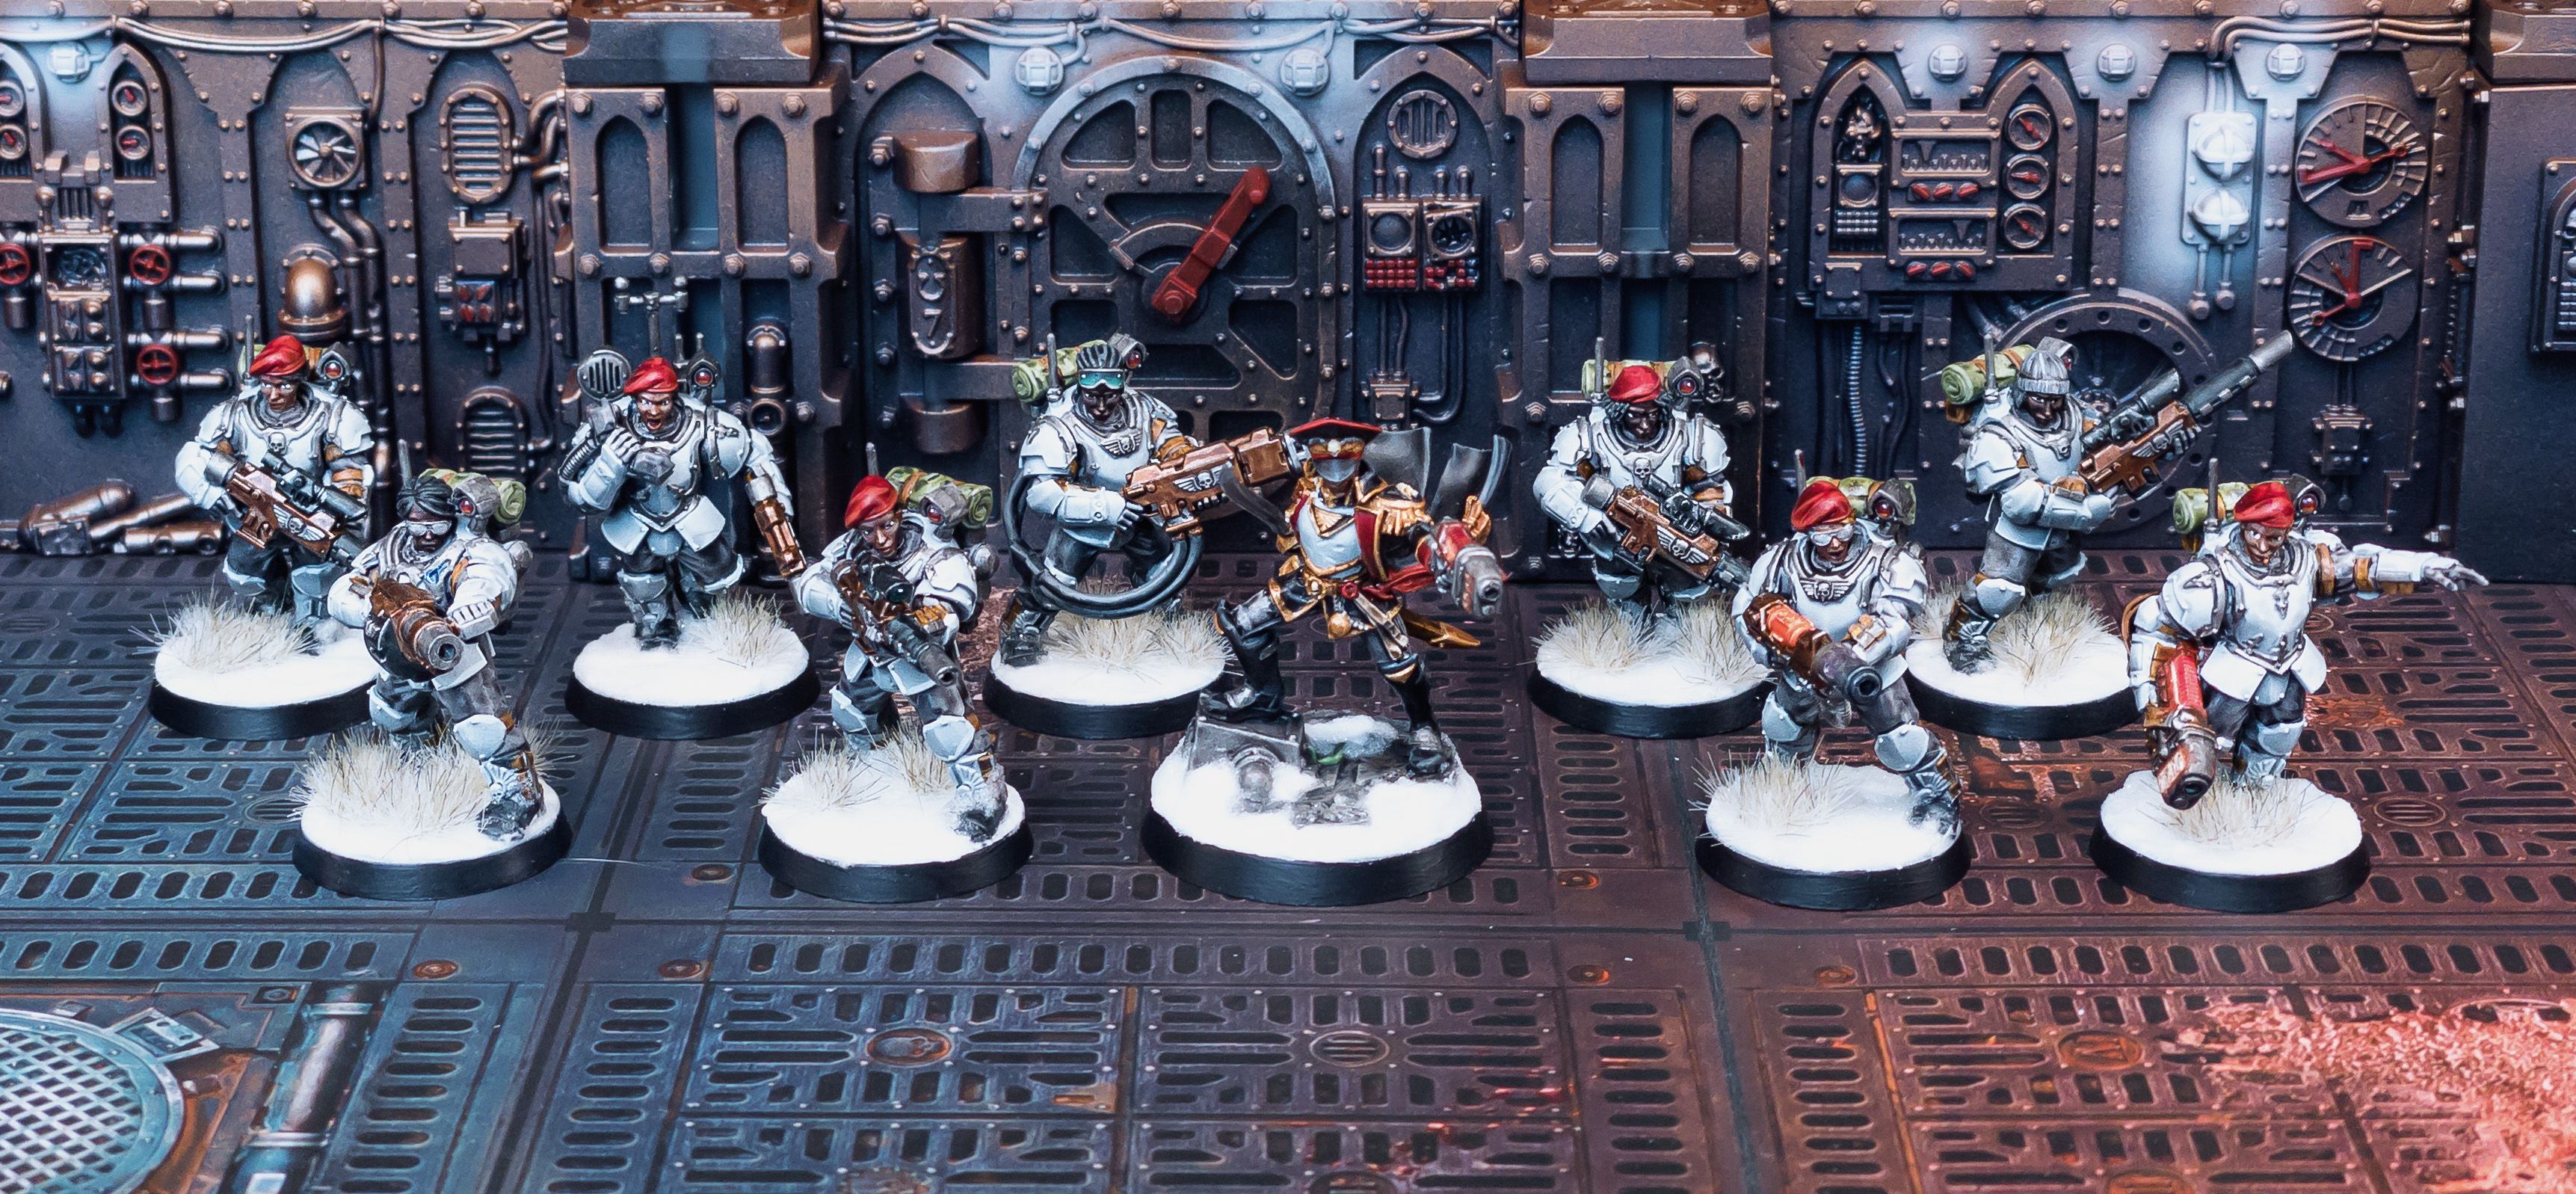 A photo of ten Astra Militarum Tempestus Scions (basically regular humans with guns in armour). The leader is in the middle and standing on a piece of industrial machinery aiming a plasma pistol and has her black cape billowing out dramatically behind her. They others are all wearing big blue-grey armour and are wielding various guns, they've all got black or brown skin, and they all look extra bad-ass because they're wearing red berets and a couple of them have sunglasses on. The bases are done so they all look like they're standing in snow.